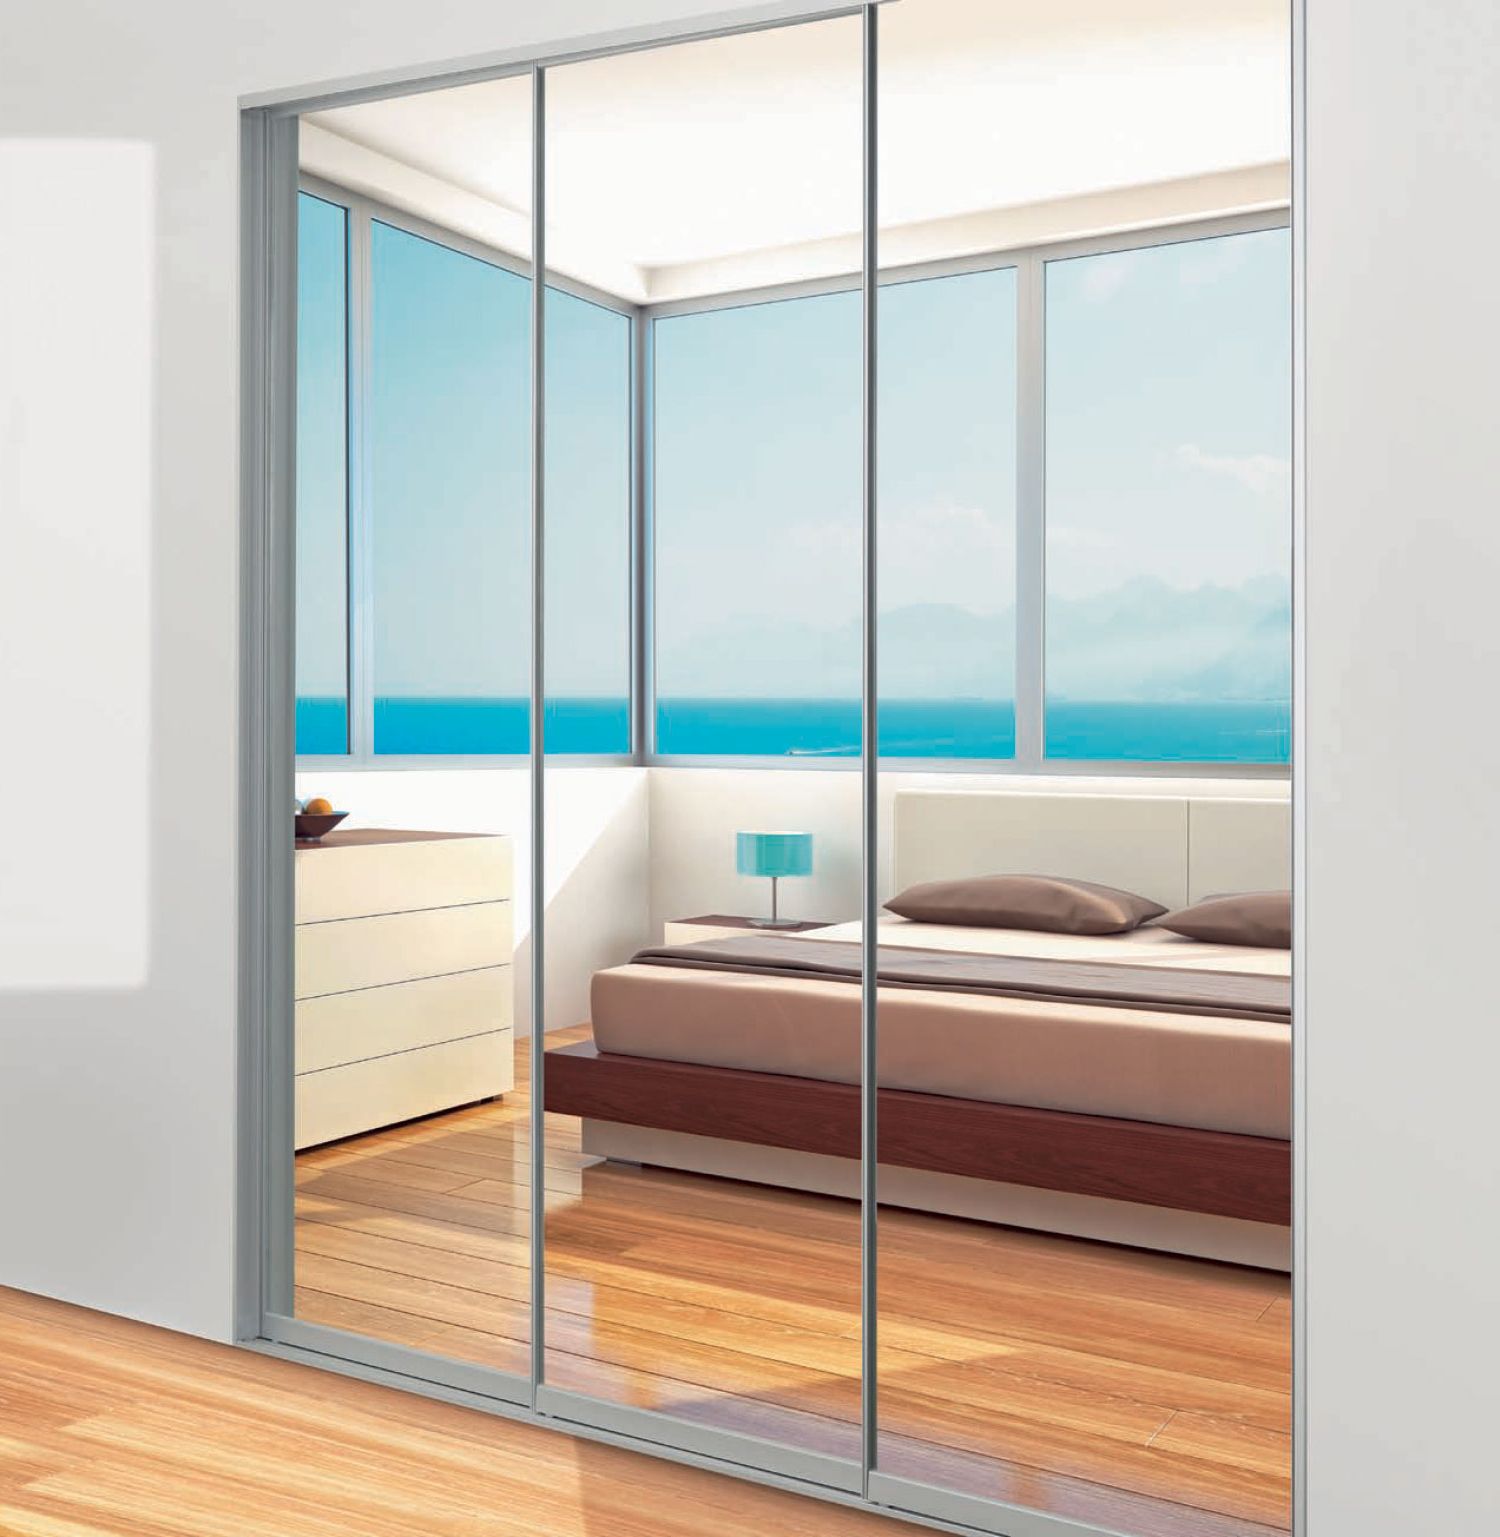 Slimline Wardrobe Door System Intended For Triple Mirrored Wardrobes (View 6 of 20)